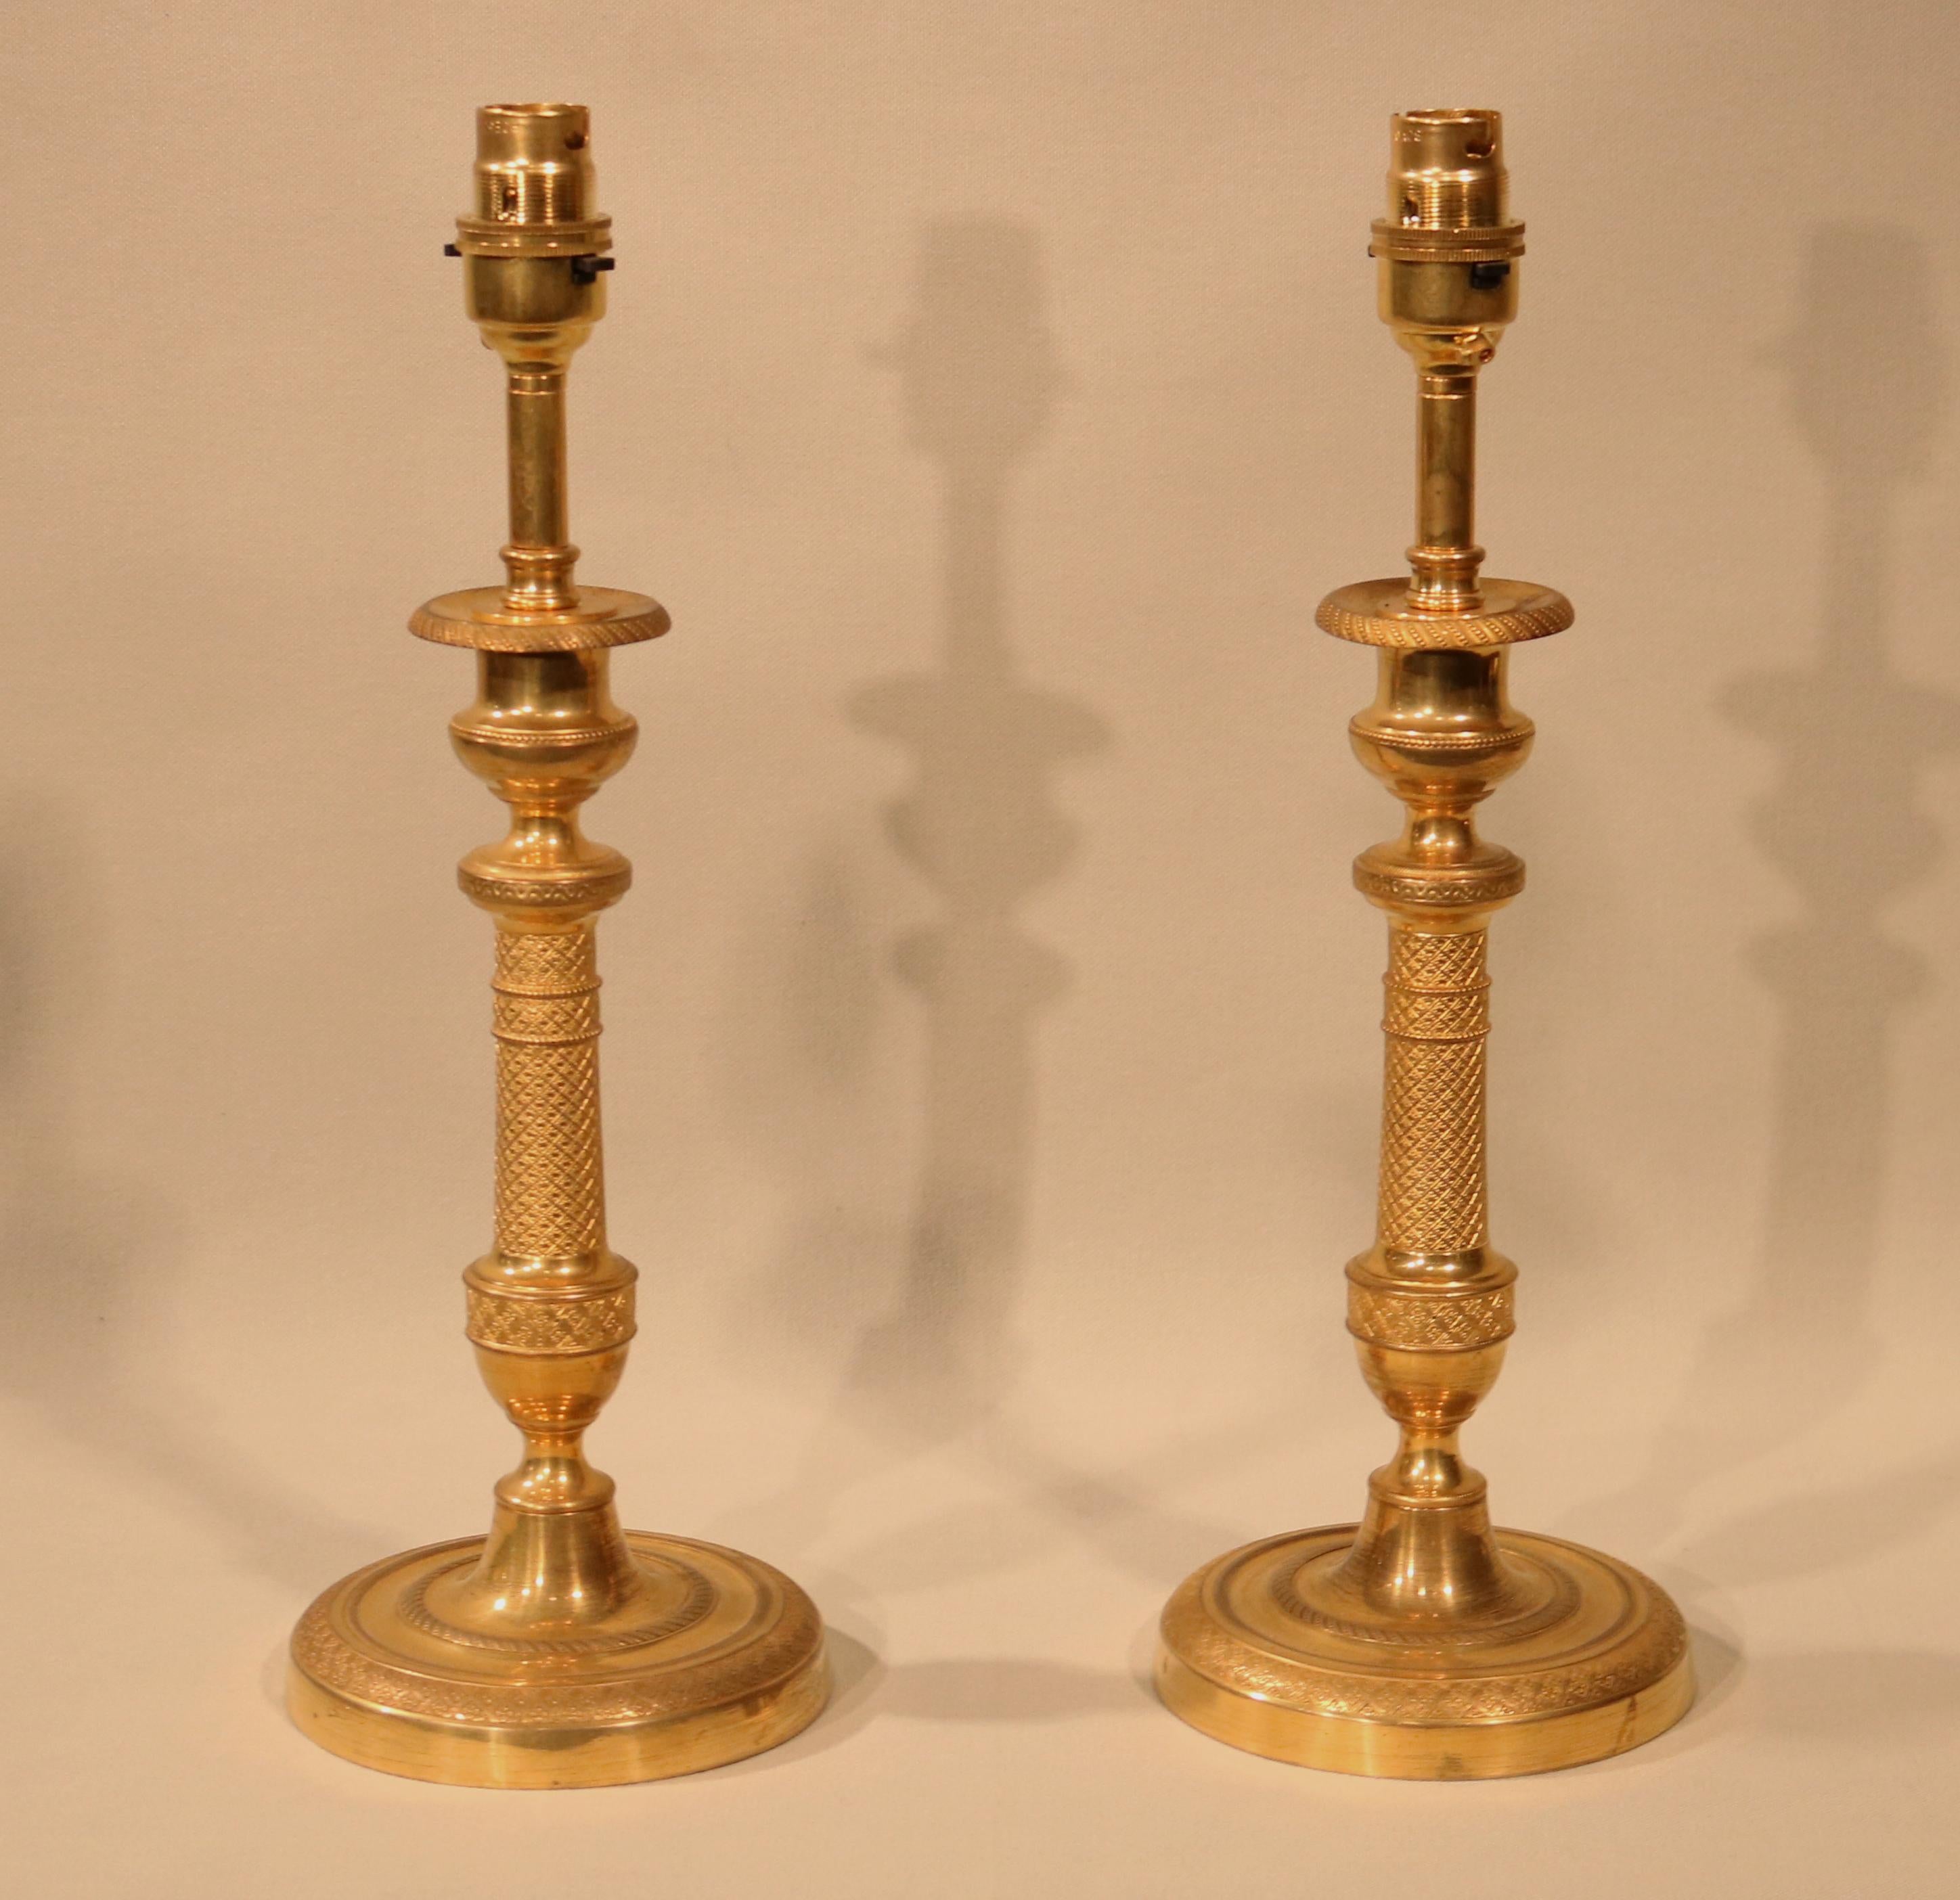 A pair of mid-19th century ormolu candlesticks with engine-turned detail throughout, having urn-shaped nozzles and tapering stems with vase-shape to the bottom, ending on circular bases. (Now converted to lamps.)